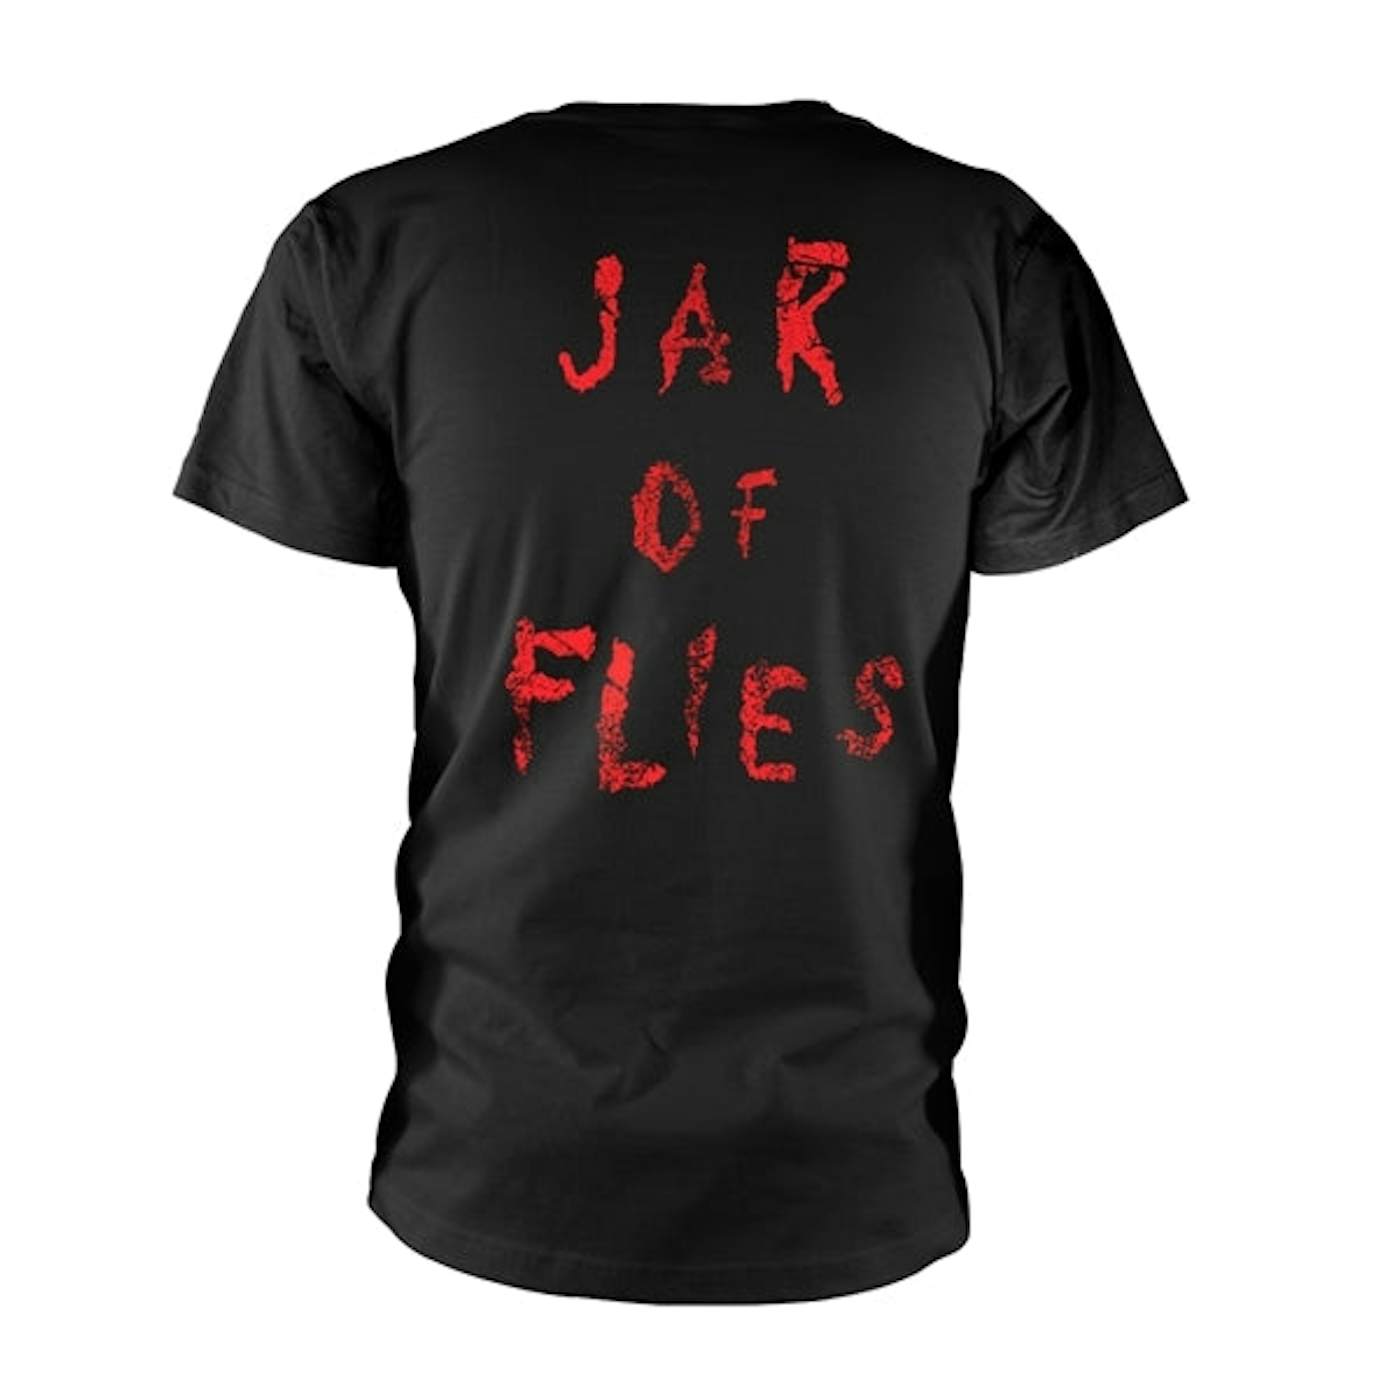 Alice In Chains T Shirt - Jar Of Flies